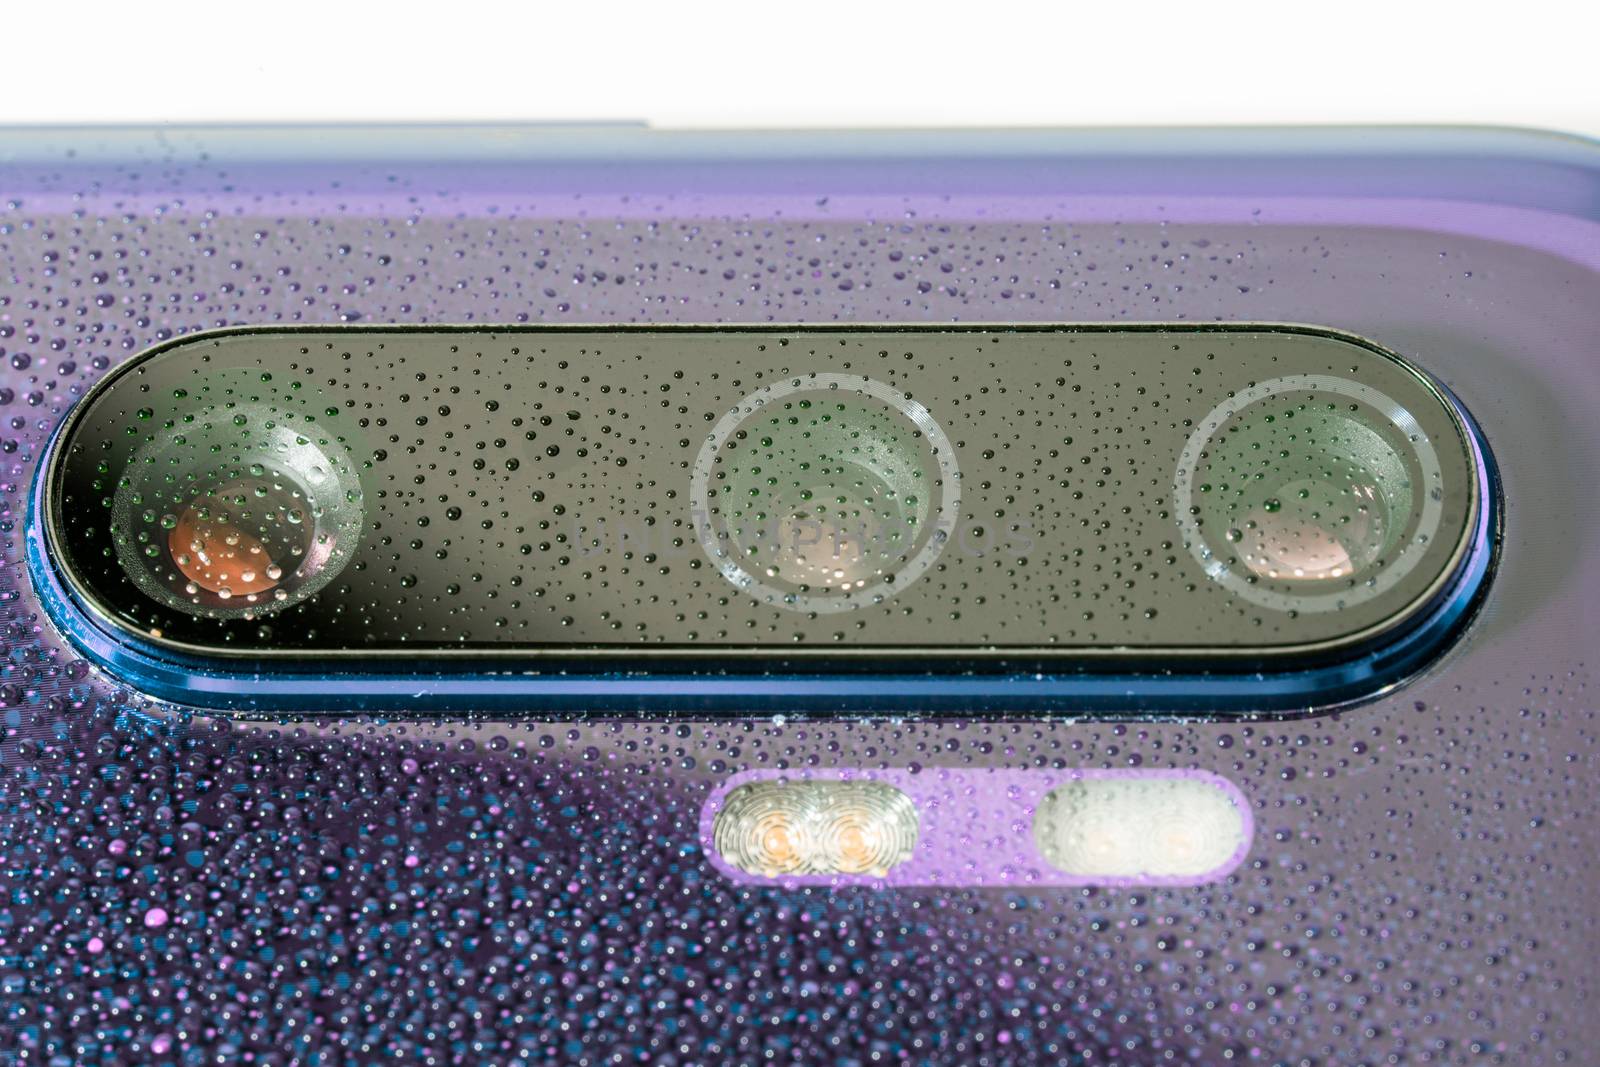 purple phone camera lens covered with small water drops - close-up with selective focus and blur.